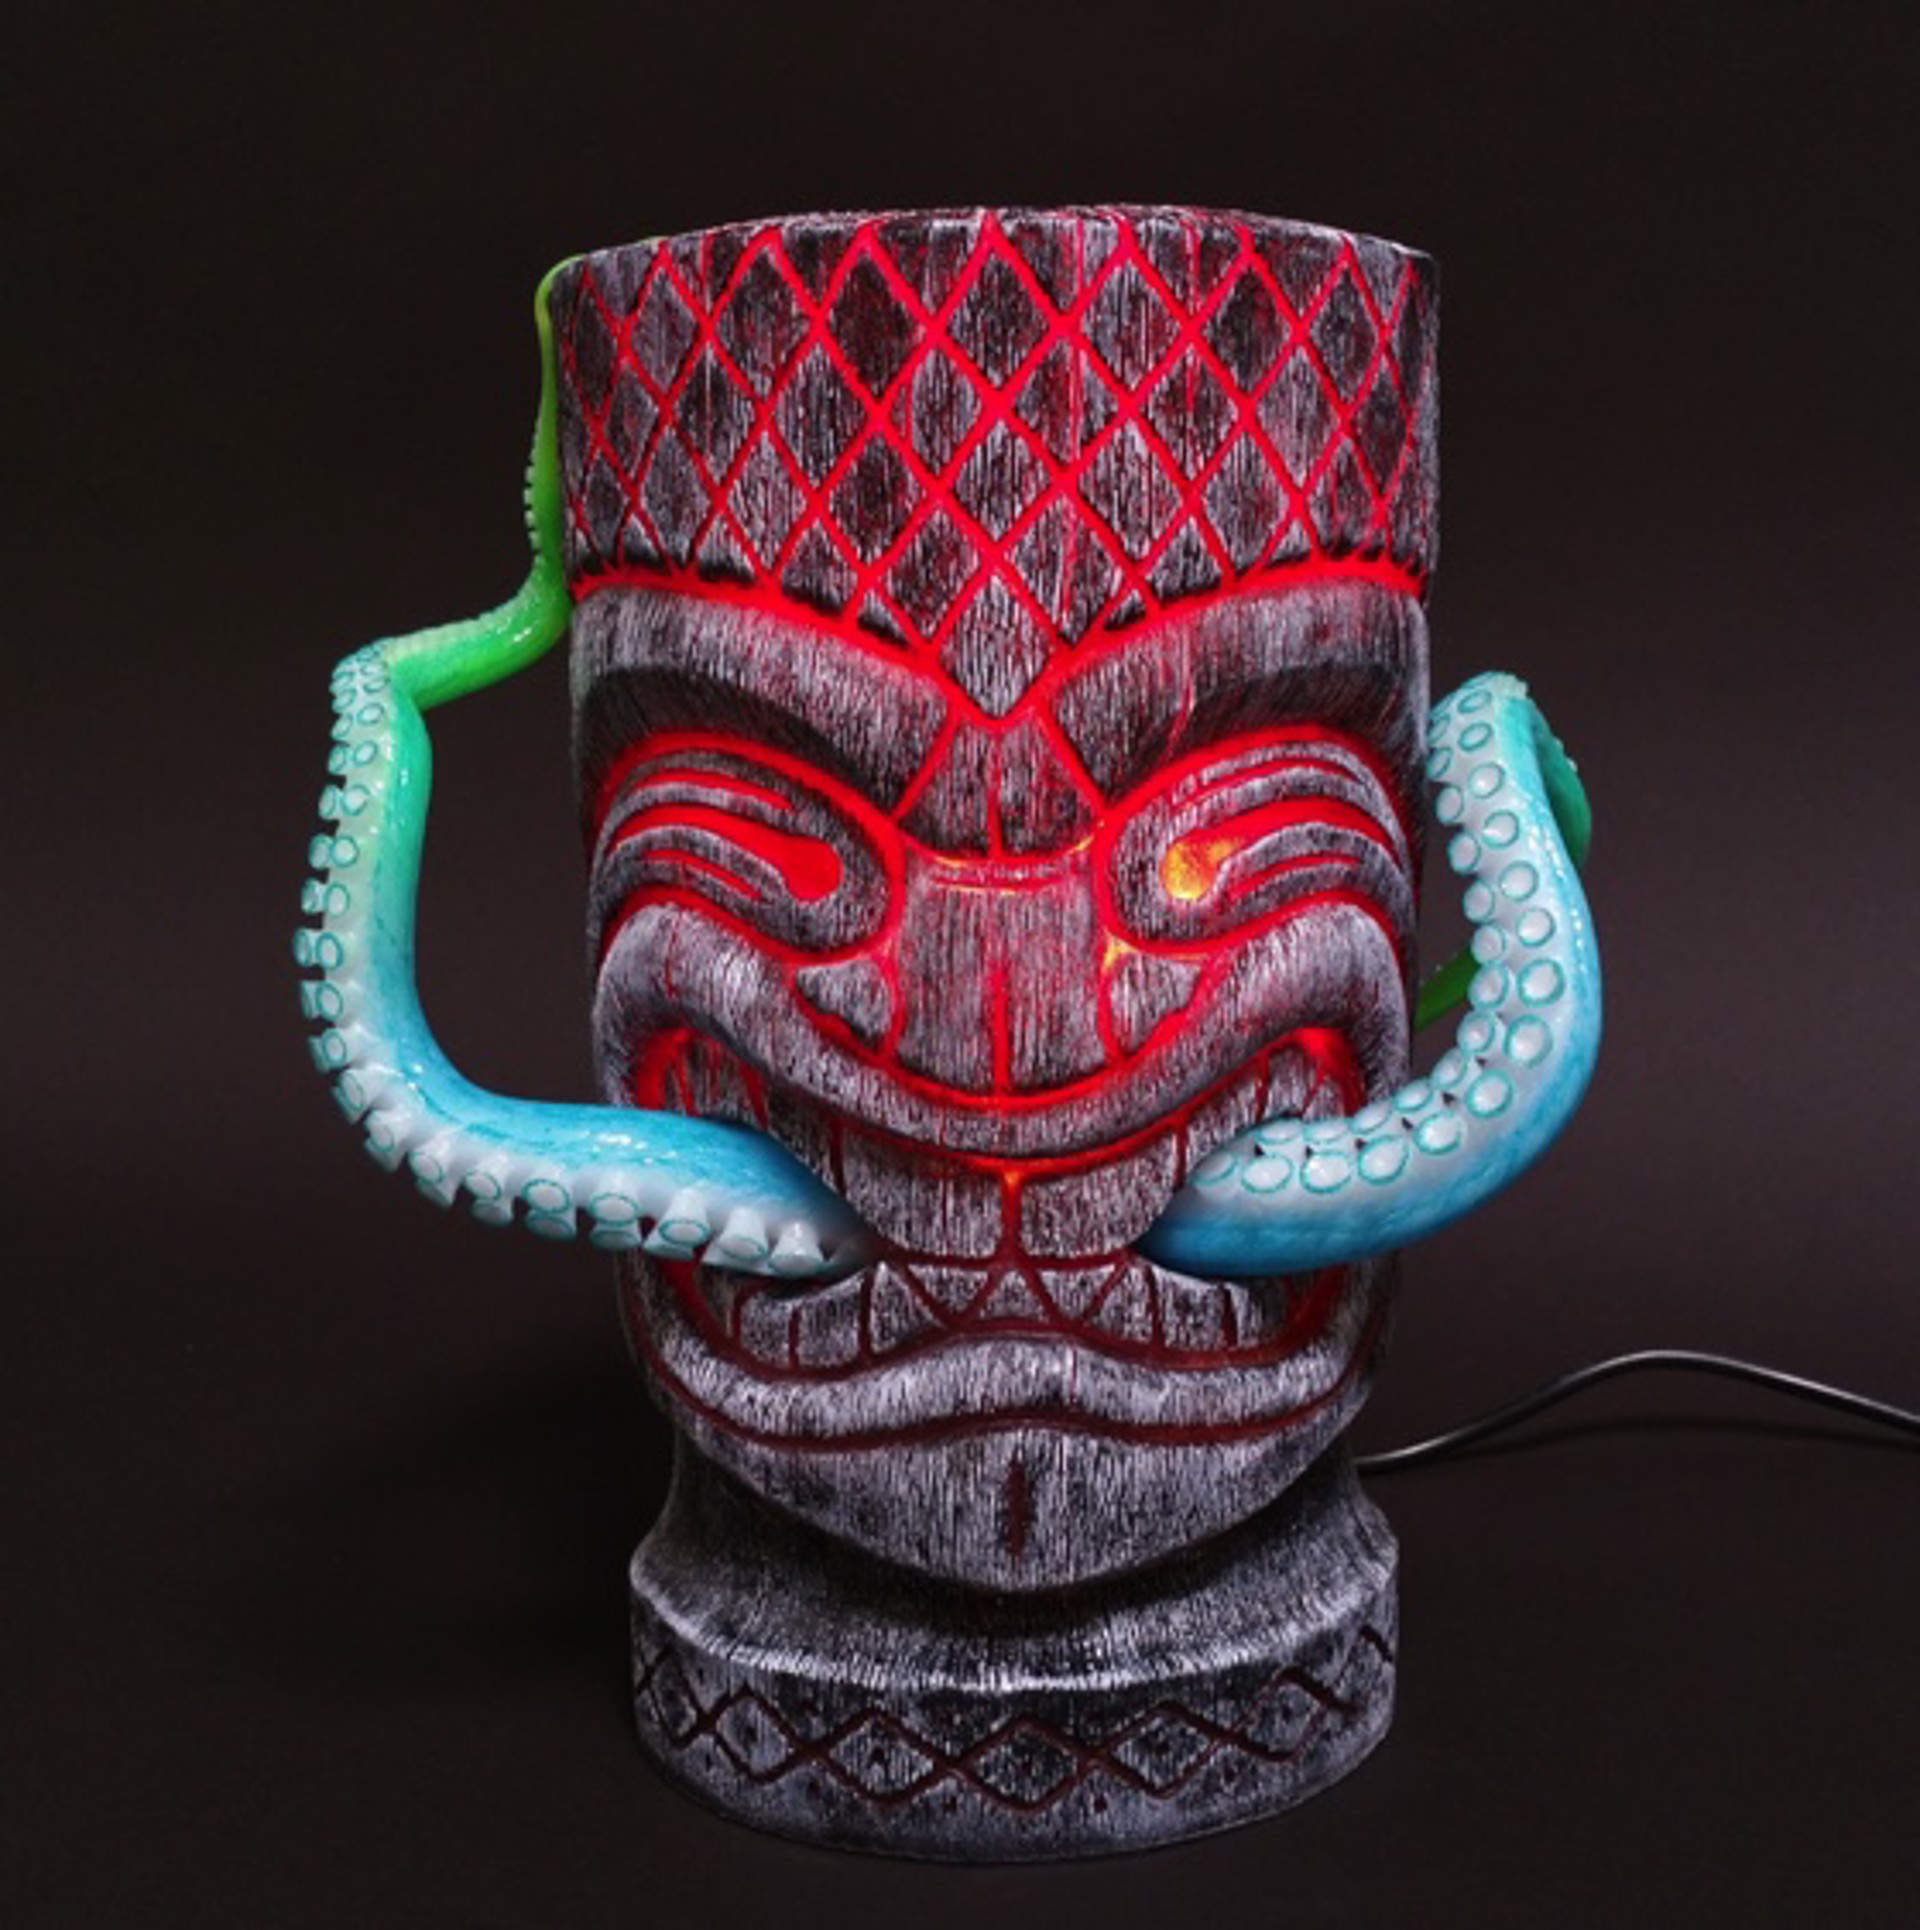 MANA TIKI FIRE OCTOPUS BITE WITH BLUE GREEN TENTACLES by Yuri Everson